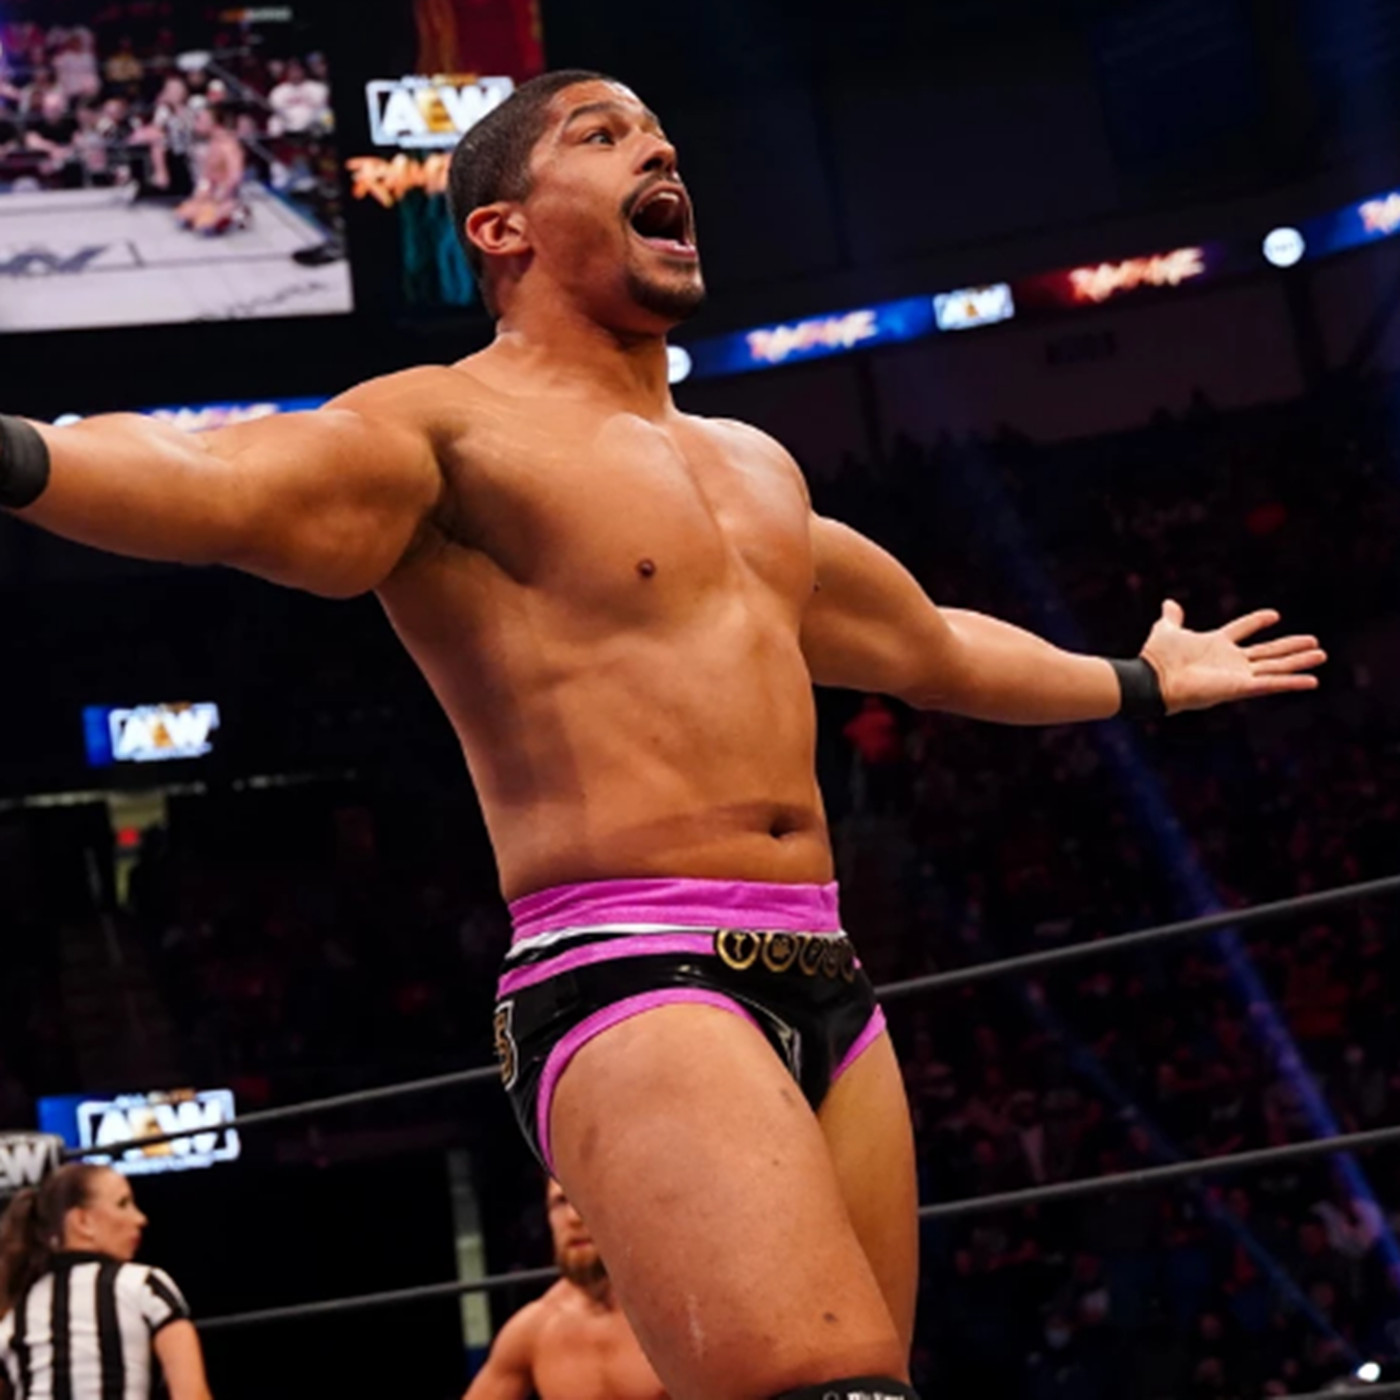 AEW's Anthony Bowens to homophobic fan: 'I hope the person grows' -  Outsports